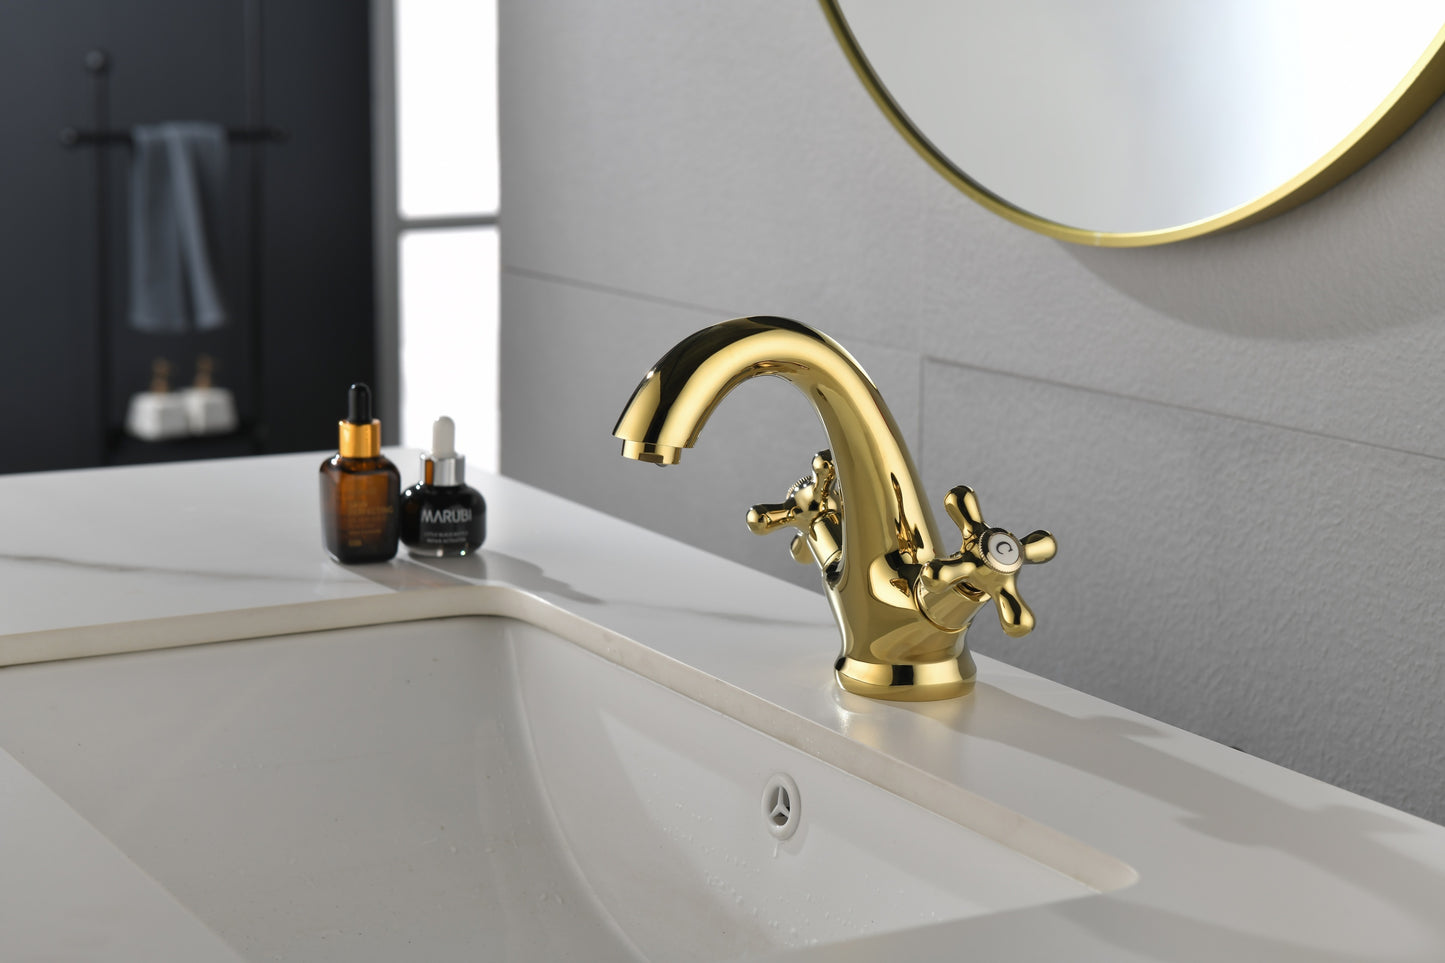 Bathroom Sink Faucet 2 Cross Knobs Gold Polish with Cover Plate Single Hole Vanity Vessel Sink Basin Cold and Hot Water Deck Mounted